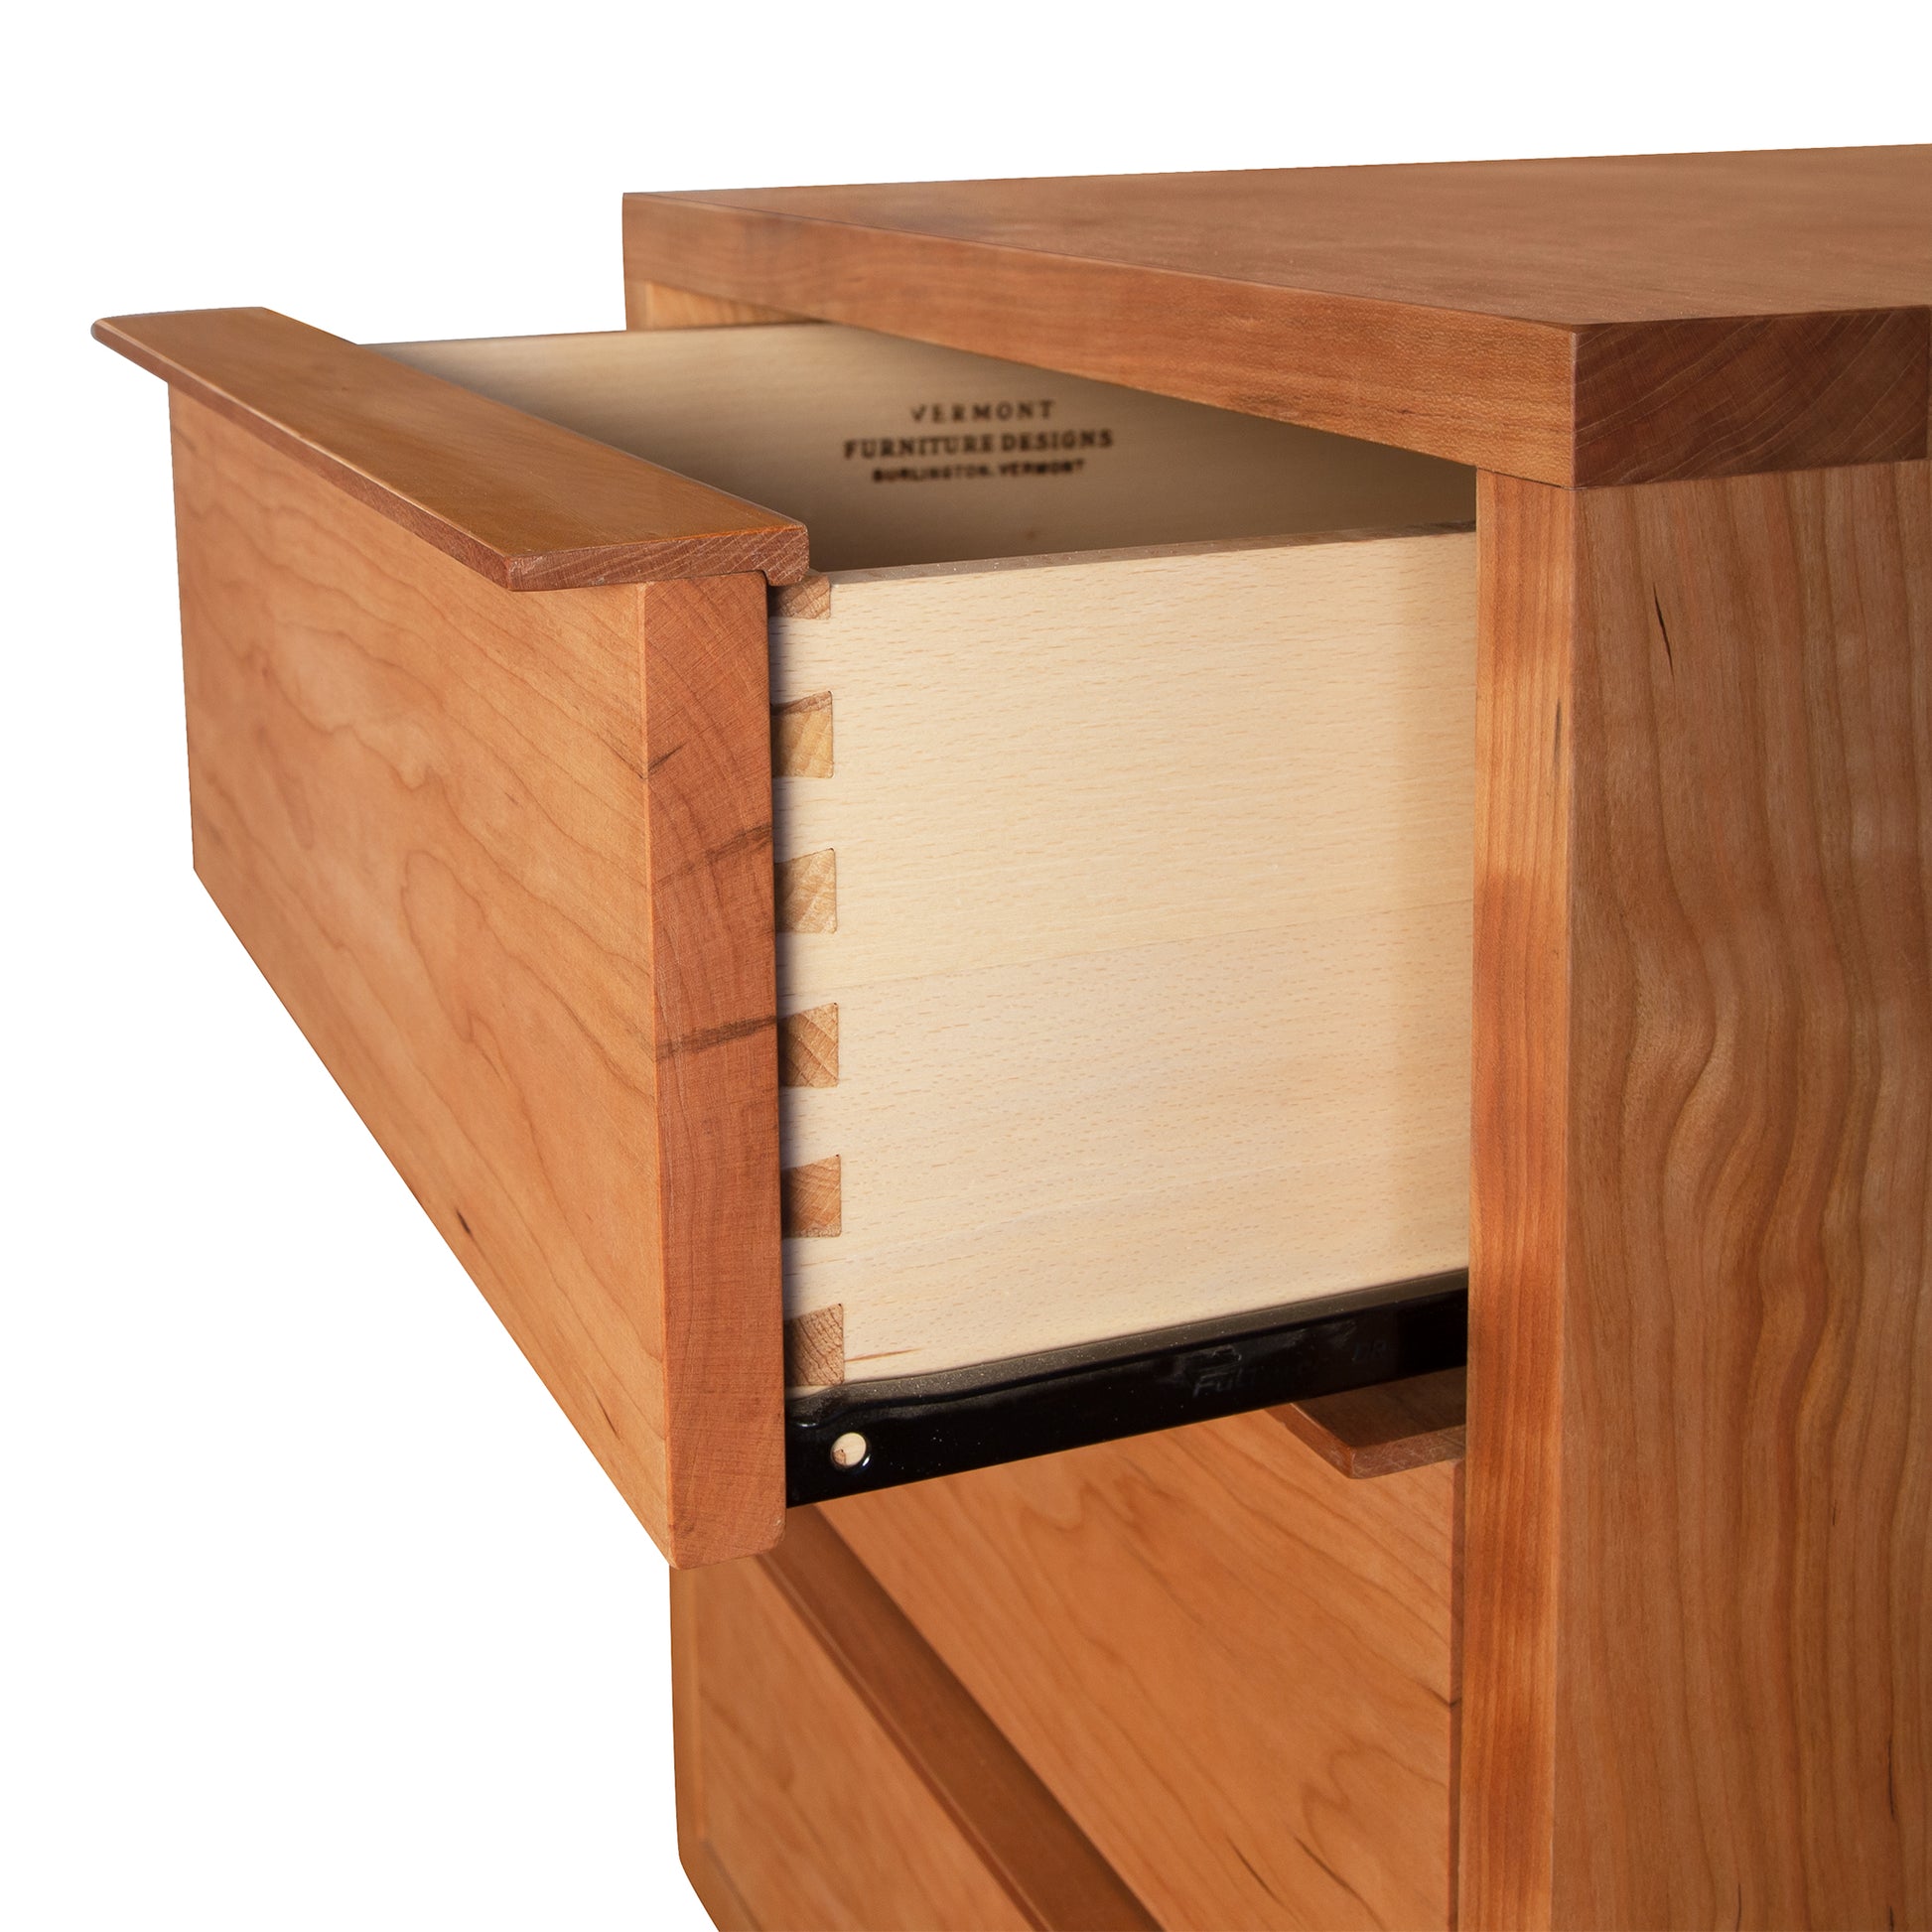 An open wooden drawer revealing its dovetail joint construction and the label of the maker "Vermont Furniture Designs" features a modern design, showcasing the Kipling 3-Drawer Nightstand.